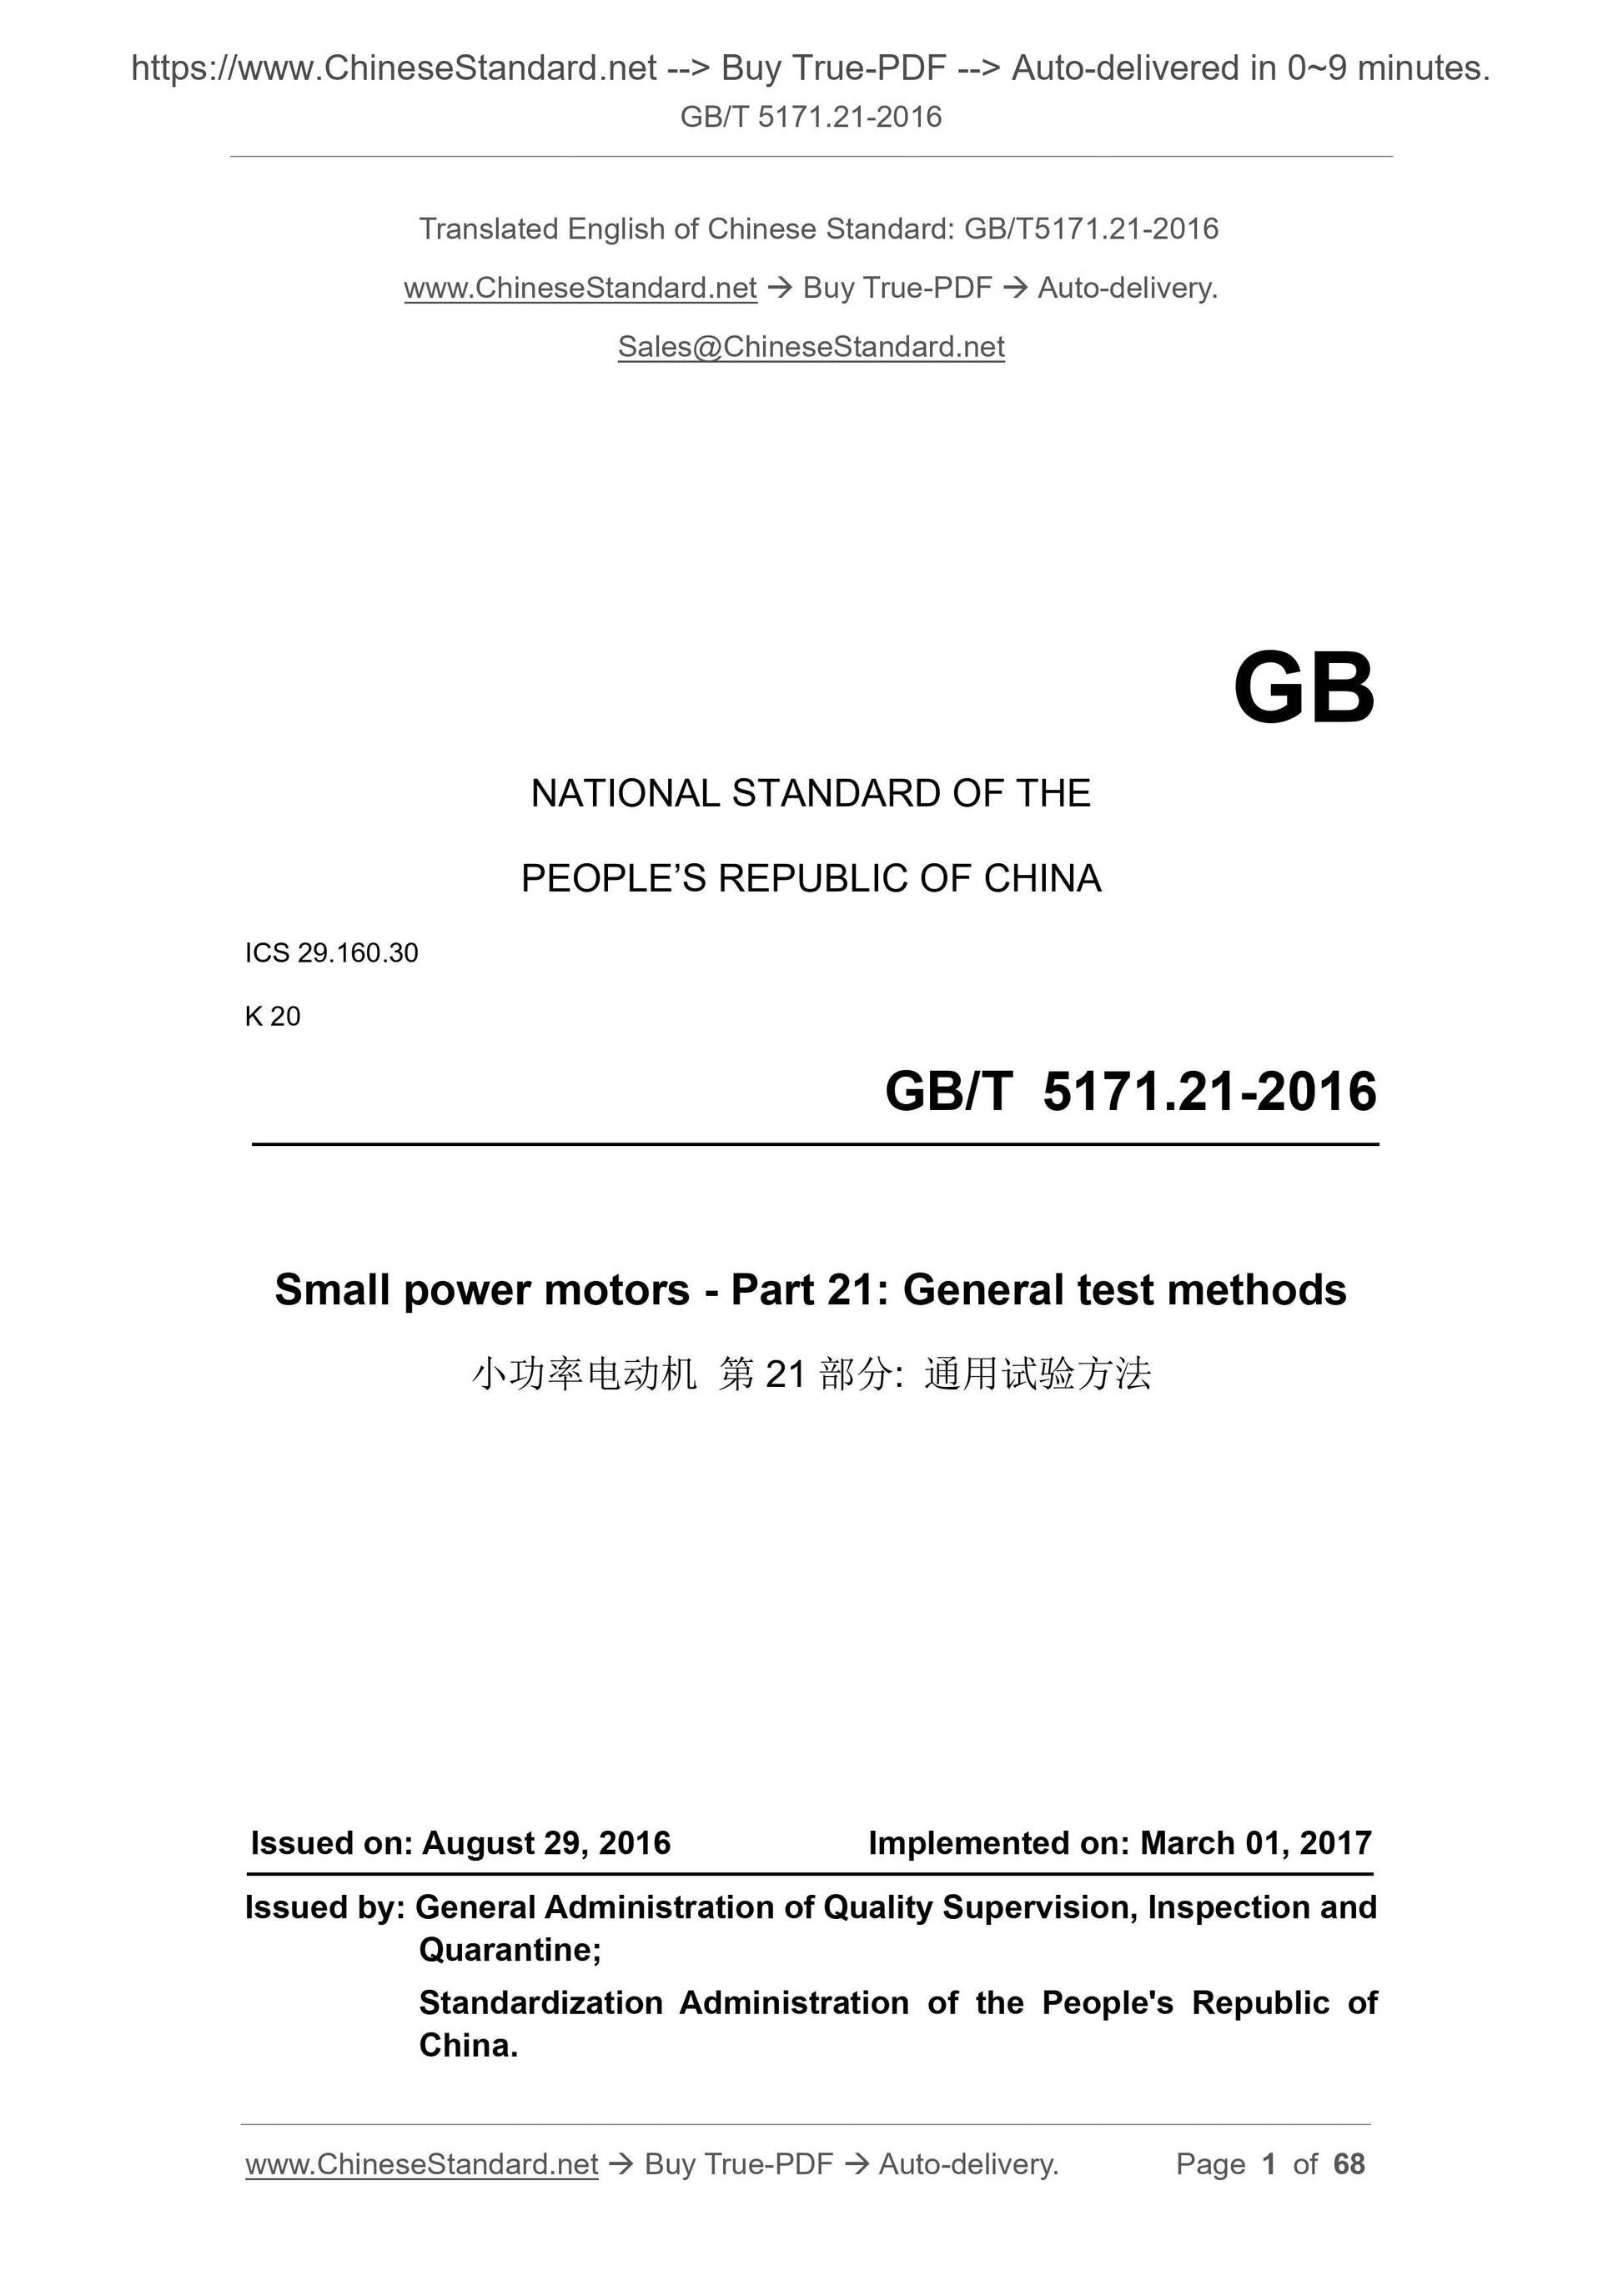 GB/T 5171.21-2016 Page 1